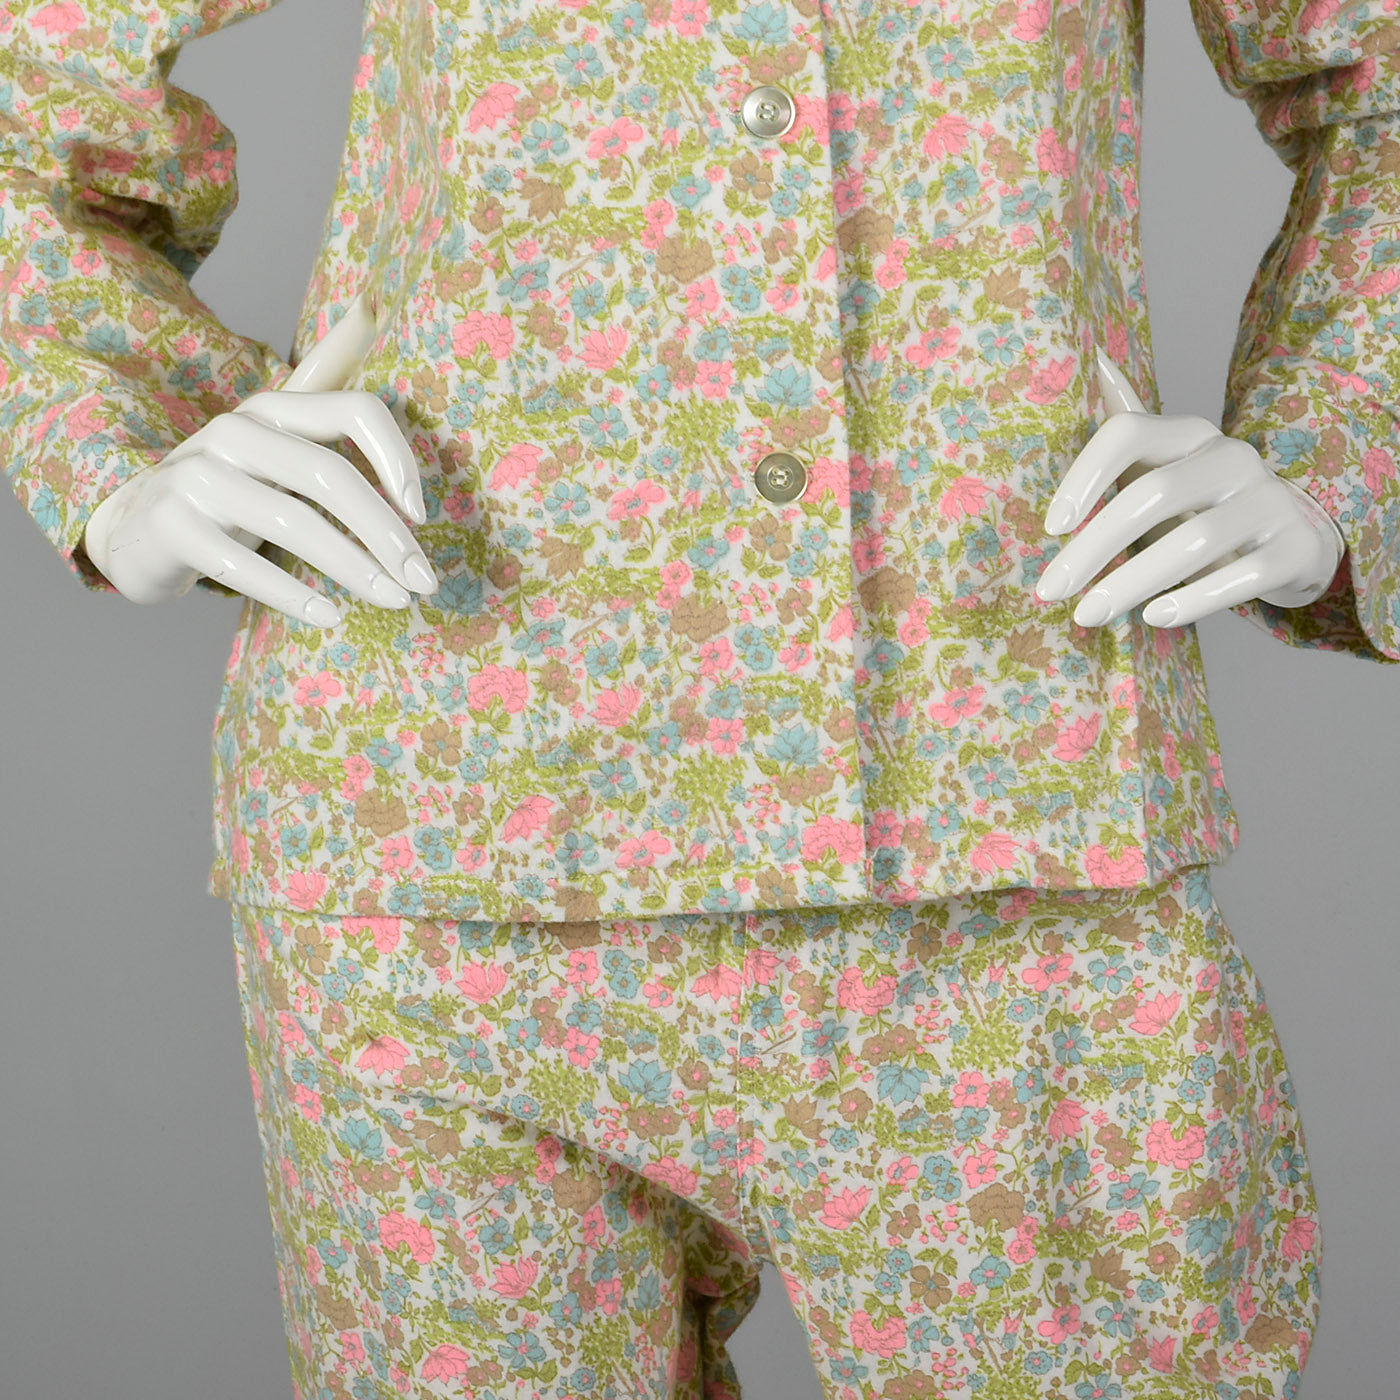 1960s Deadstock Flannel Pajamas in Pink Floral